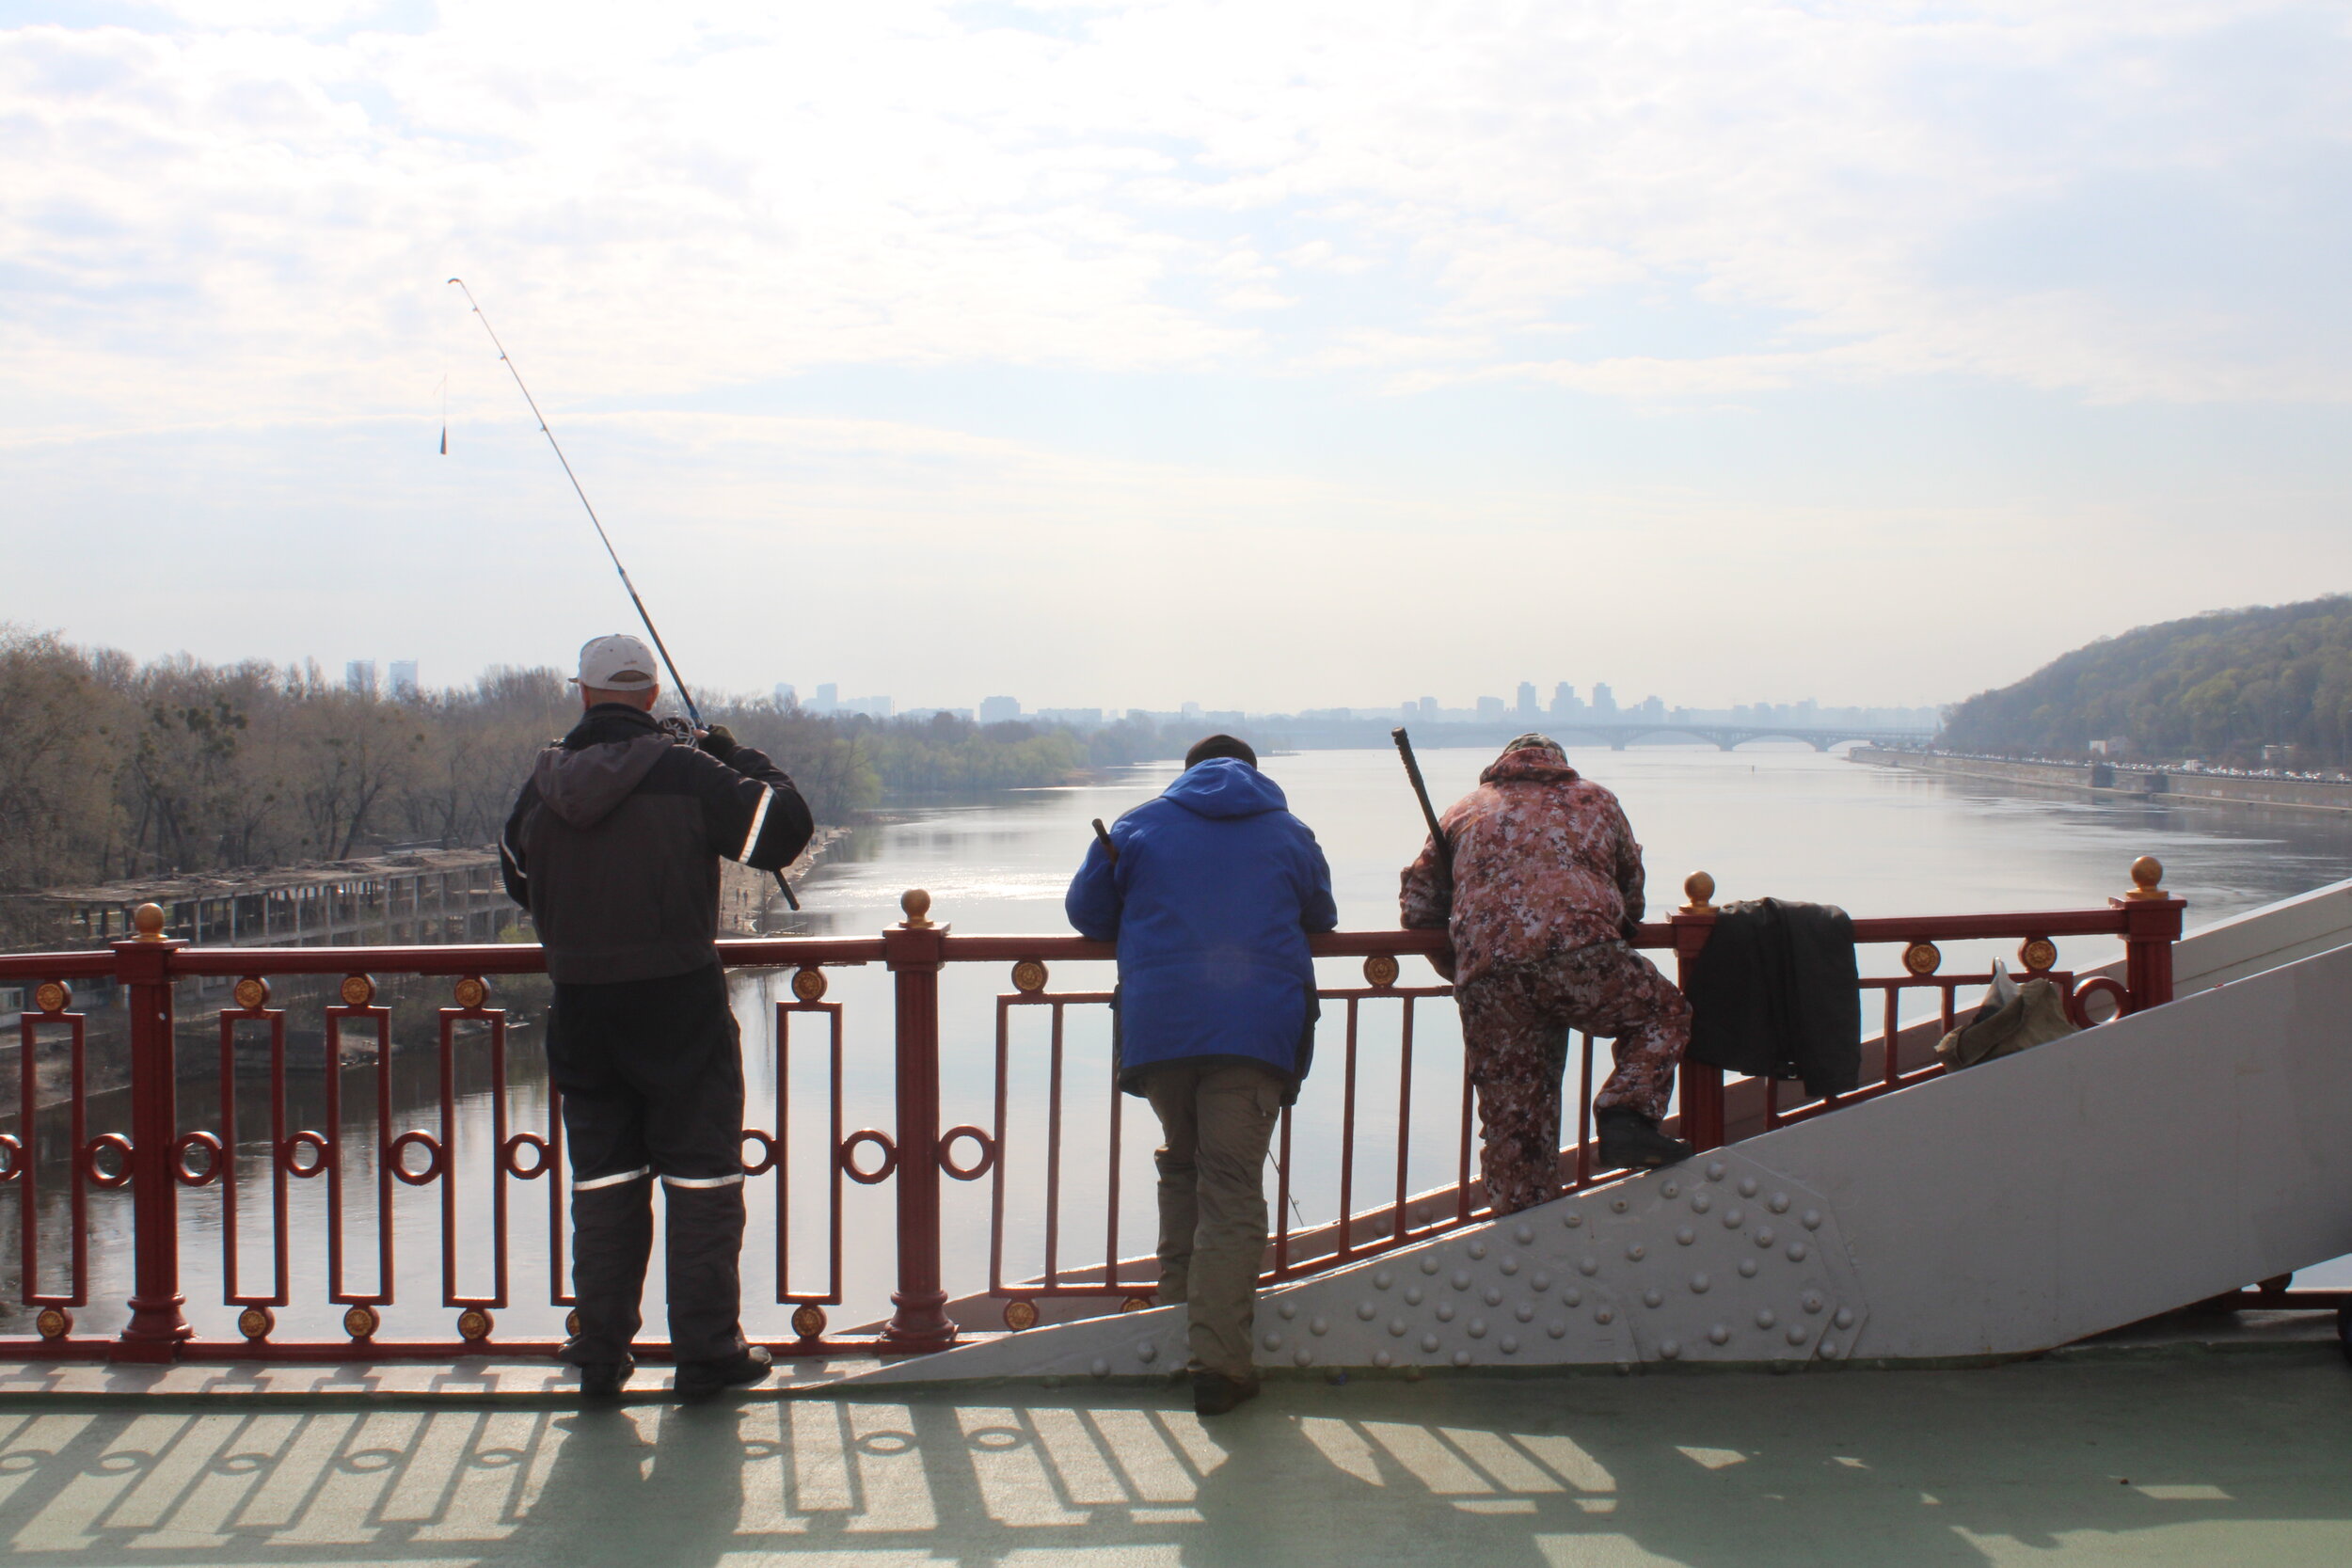 PICTURED: Hobby fishermen enjoying a moment of sun in the cool morning, casting their lines over the pedestrian bridge over the Dnieper.